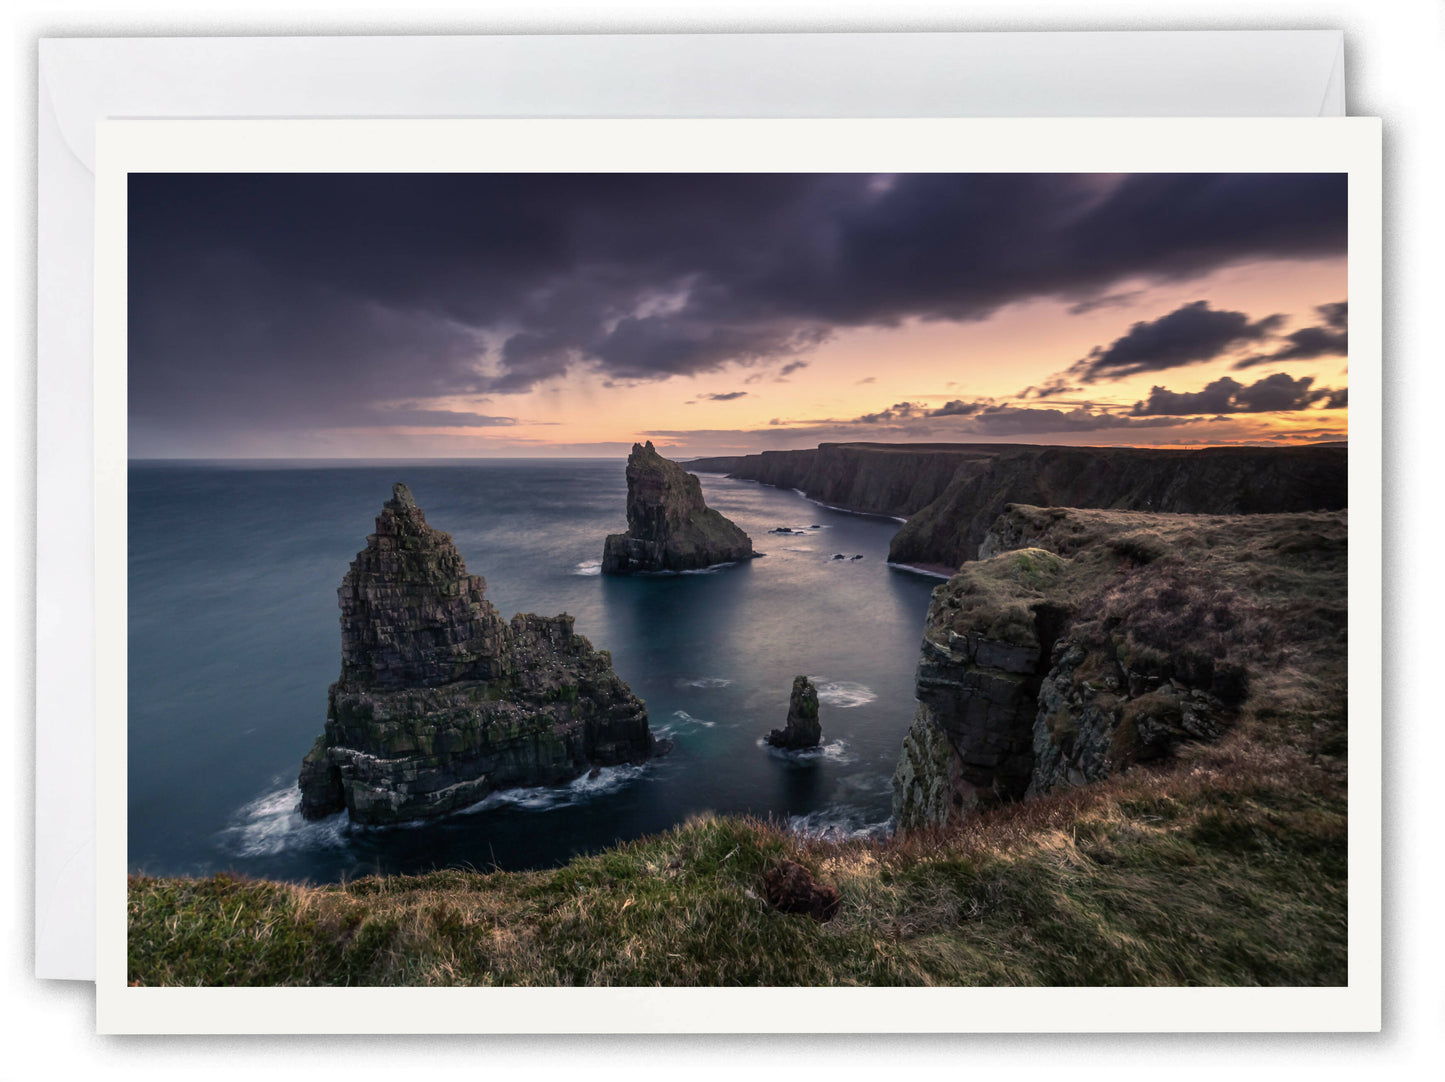 Stacks of Duncansby, Caithness - Scotland Greeting Card - Blank Inside